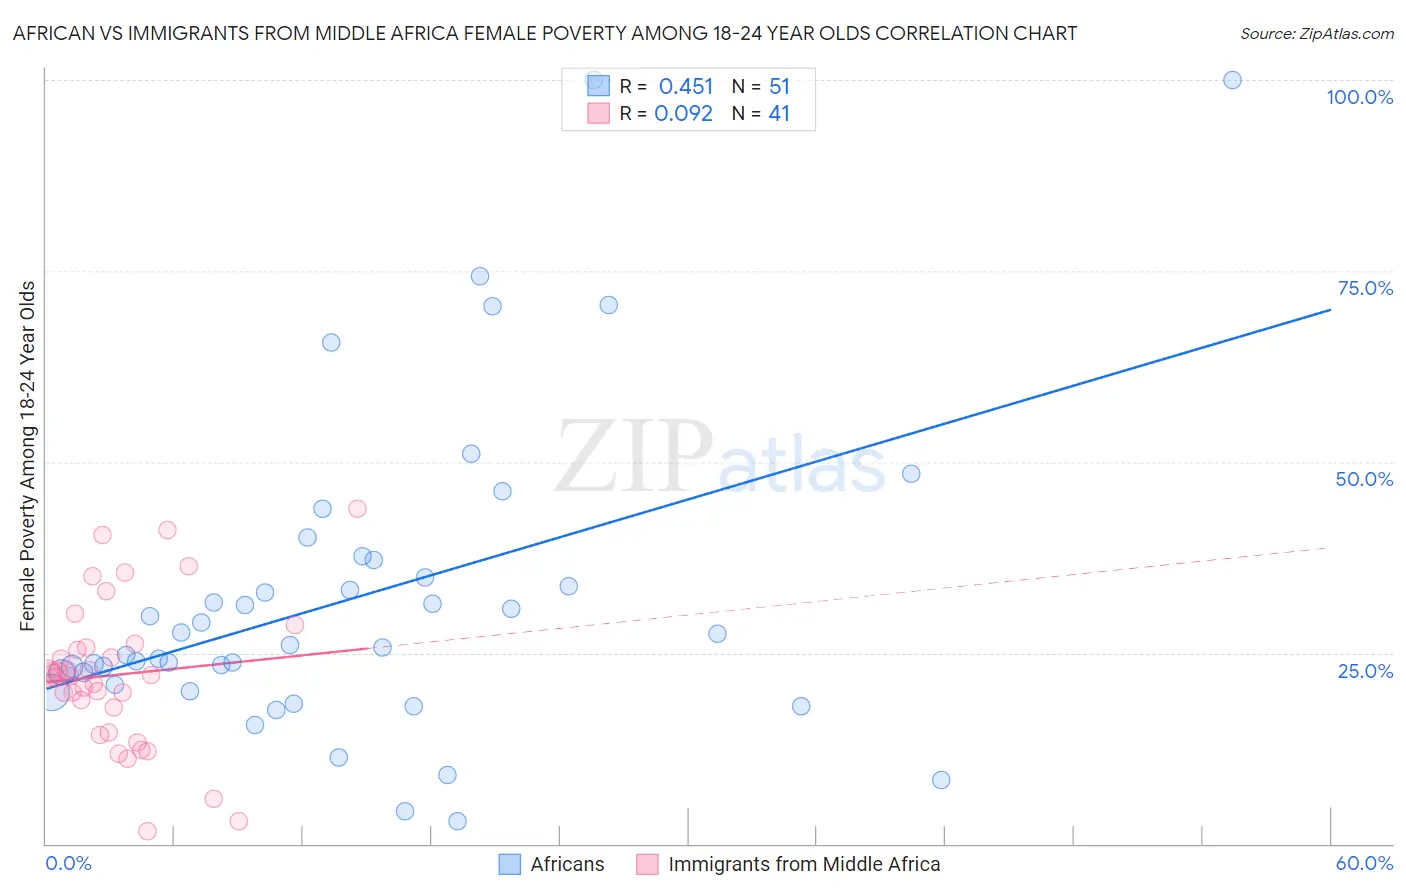 African vs Immigrants from Middle Africa Female Poverty Among 18-24 Year Olds